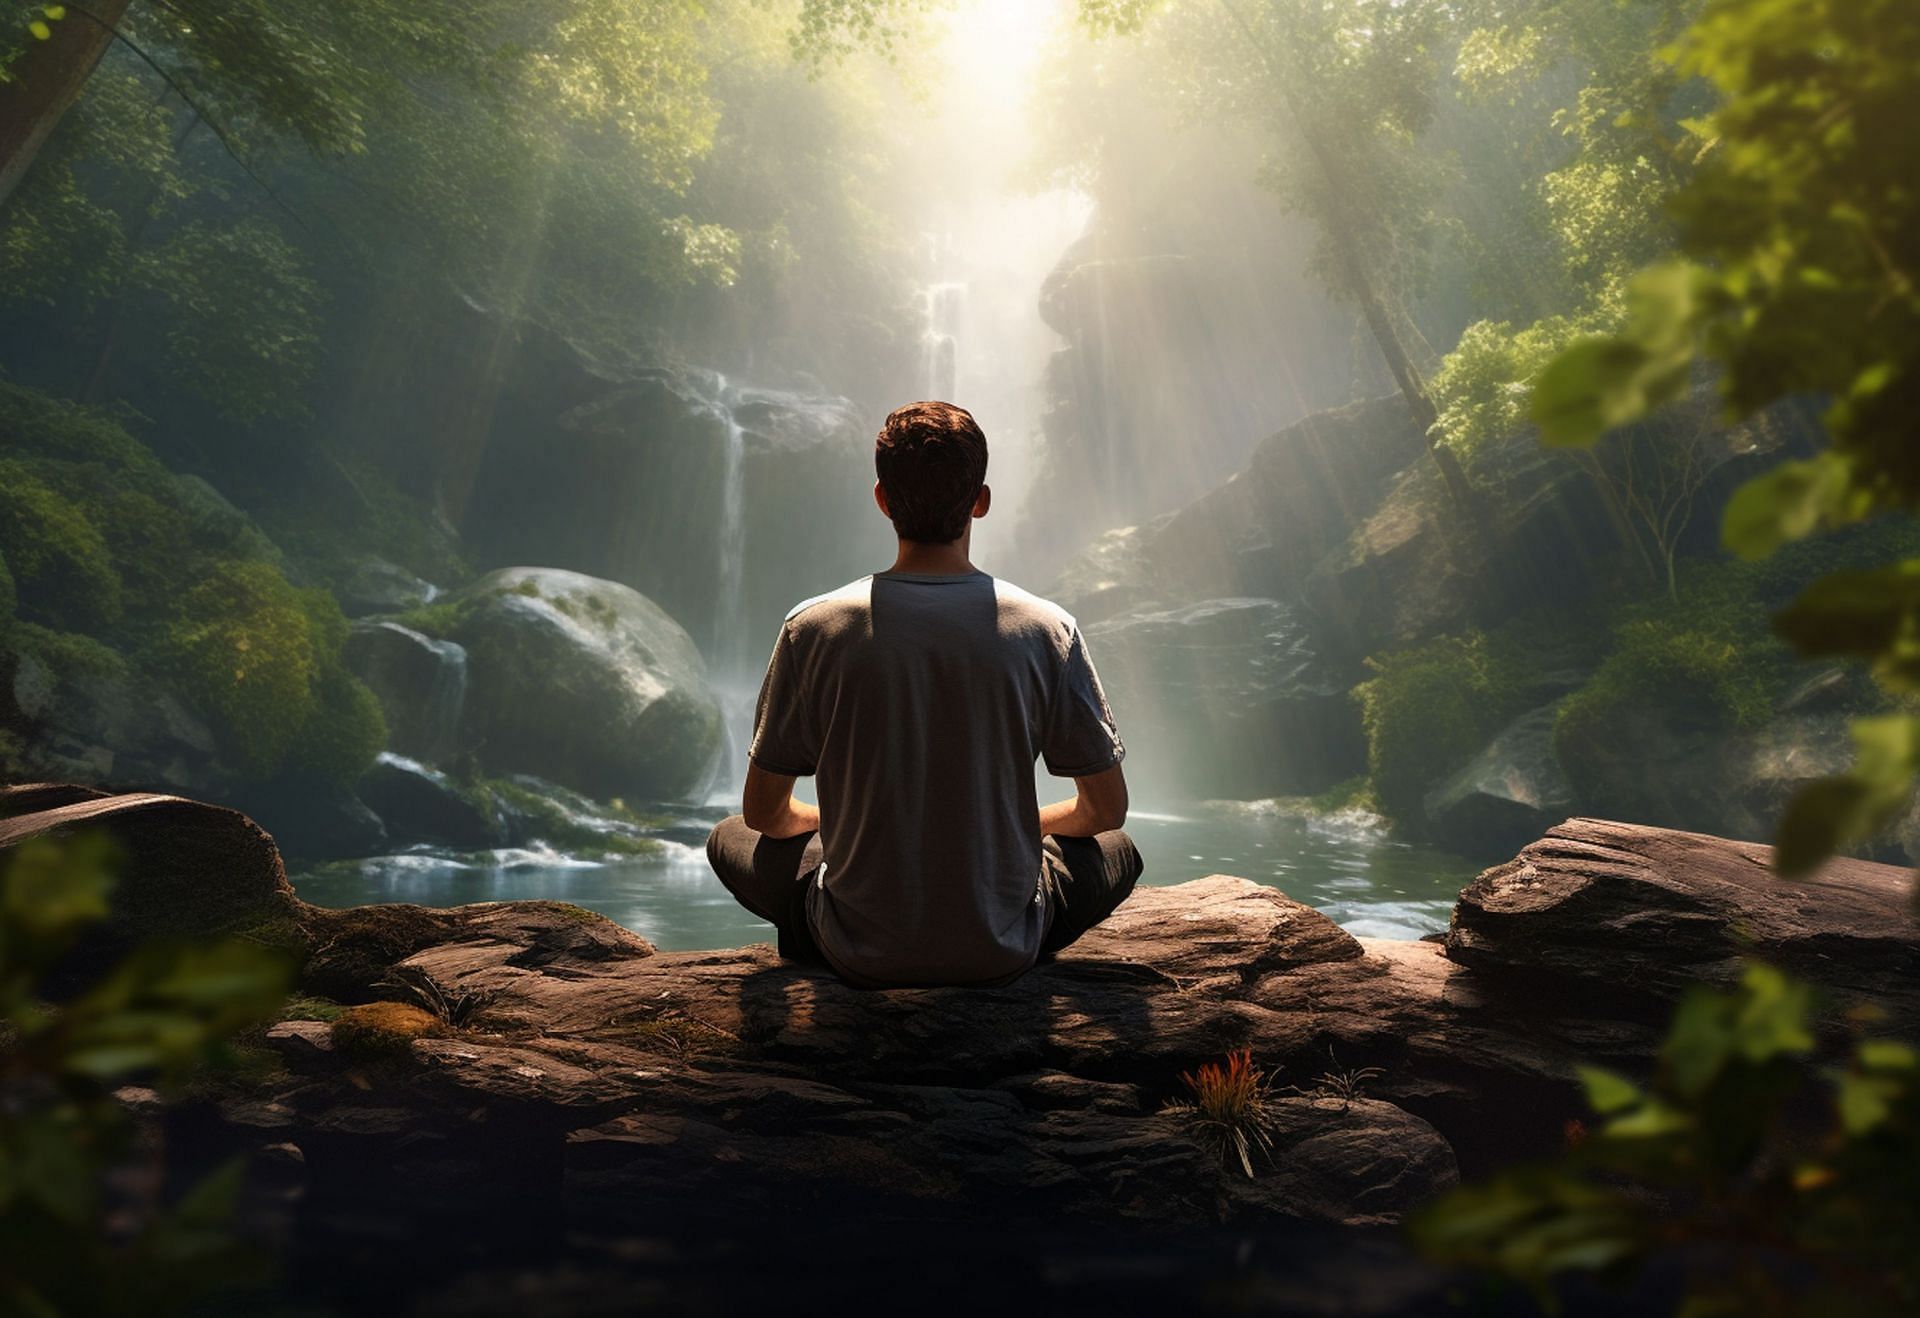 Starting with just 5-10 minutes of meditation can help, (Image via Vecteezy)